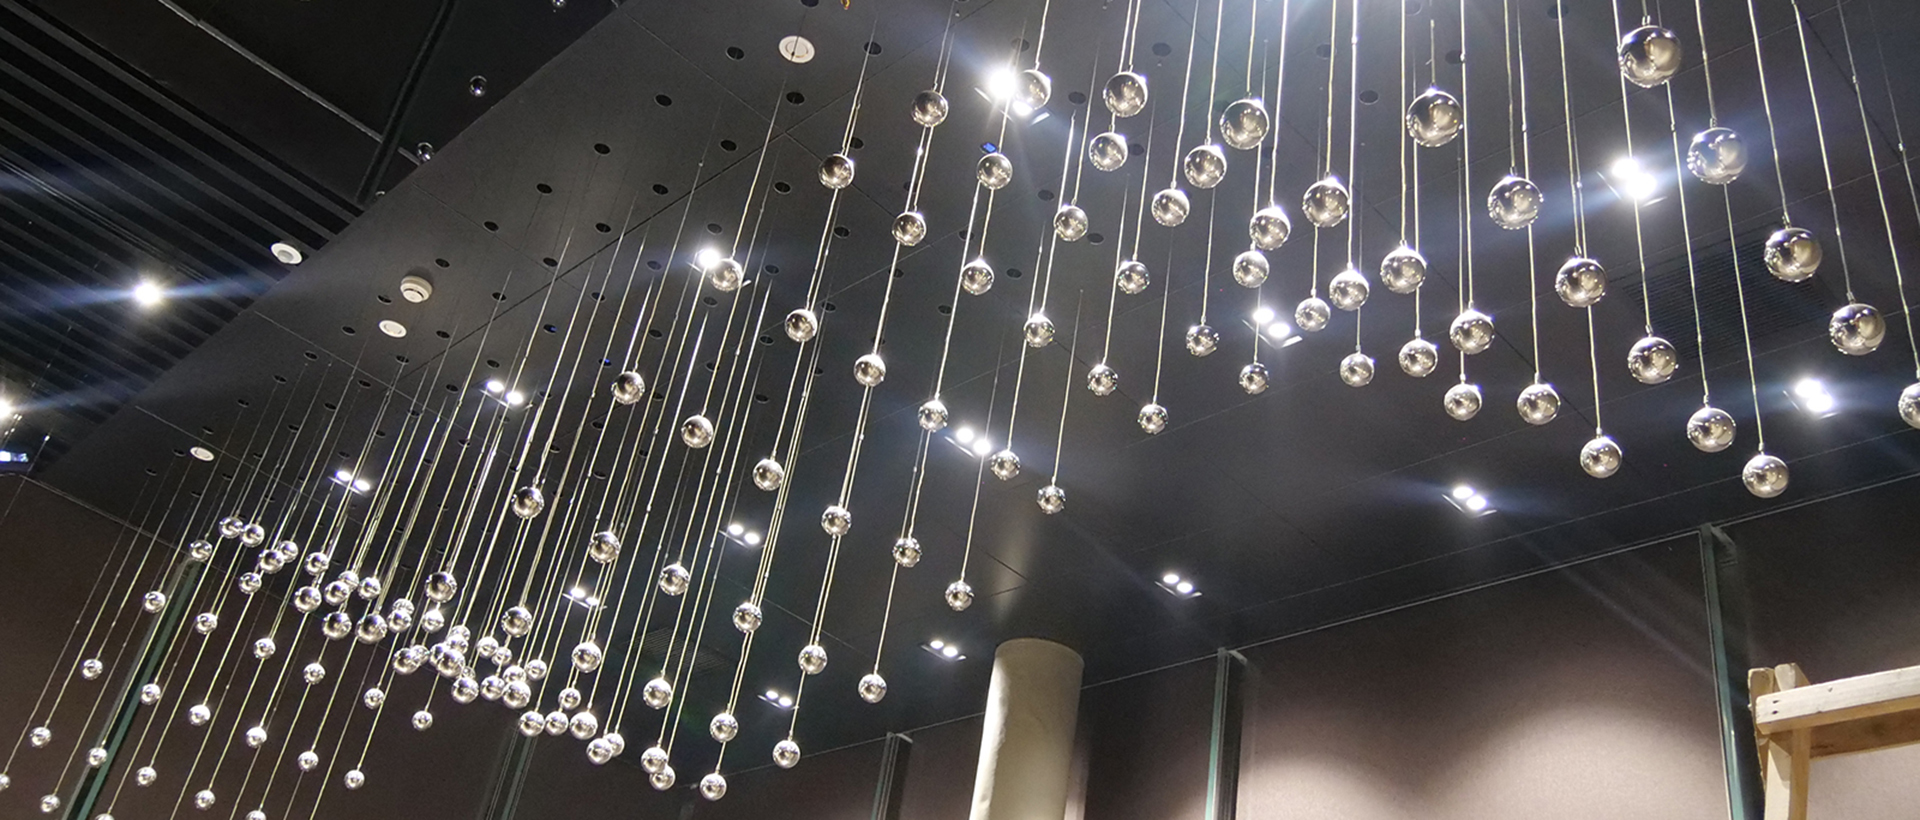 132 sets Kinetic Sculpture balls used in Guangzhou Poly Exhibition Hall 2020 (3)